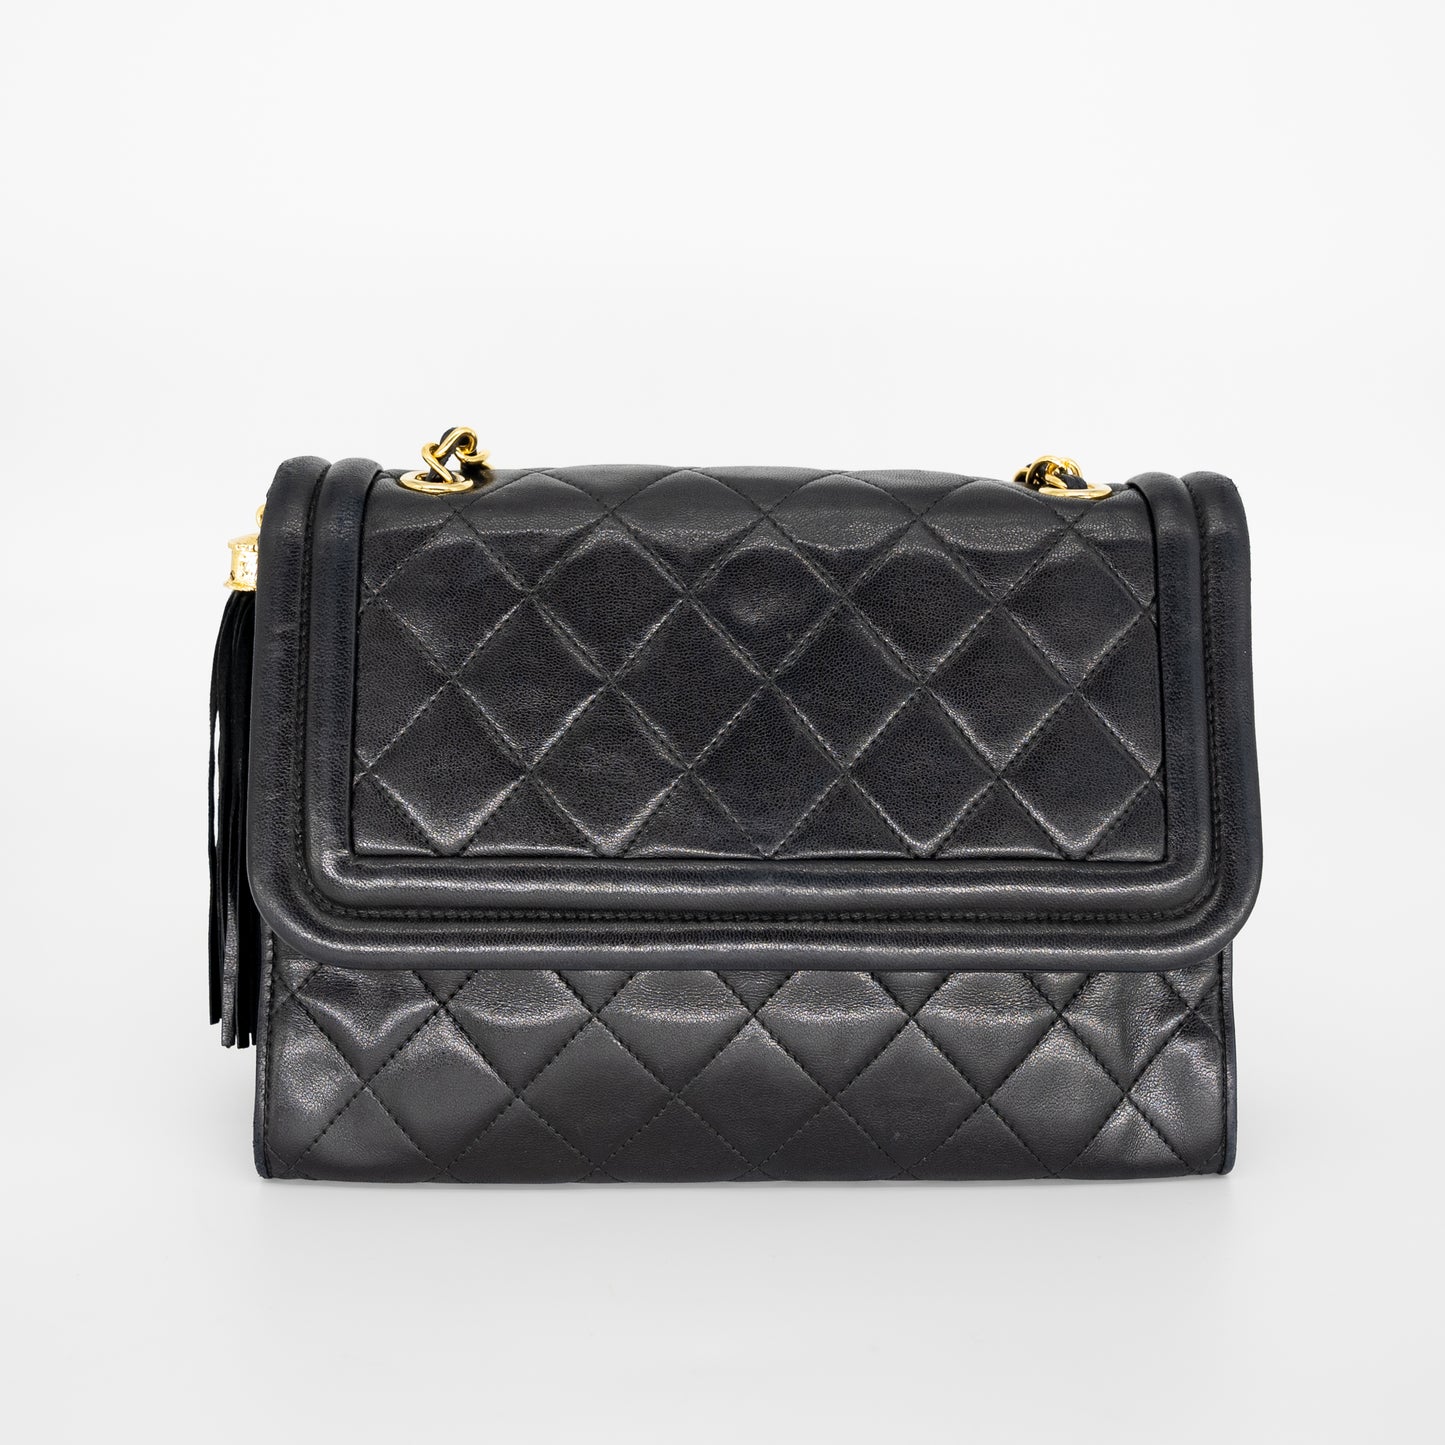 Sold at Auction: A Chanel sand-coloured quilted lambskin leather bag, 1980s